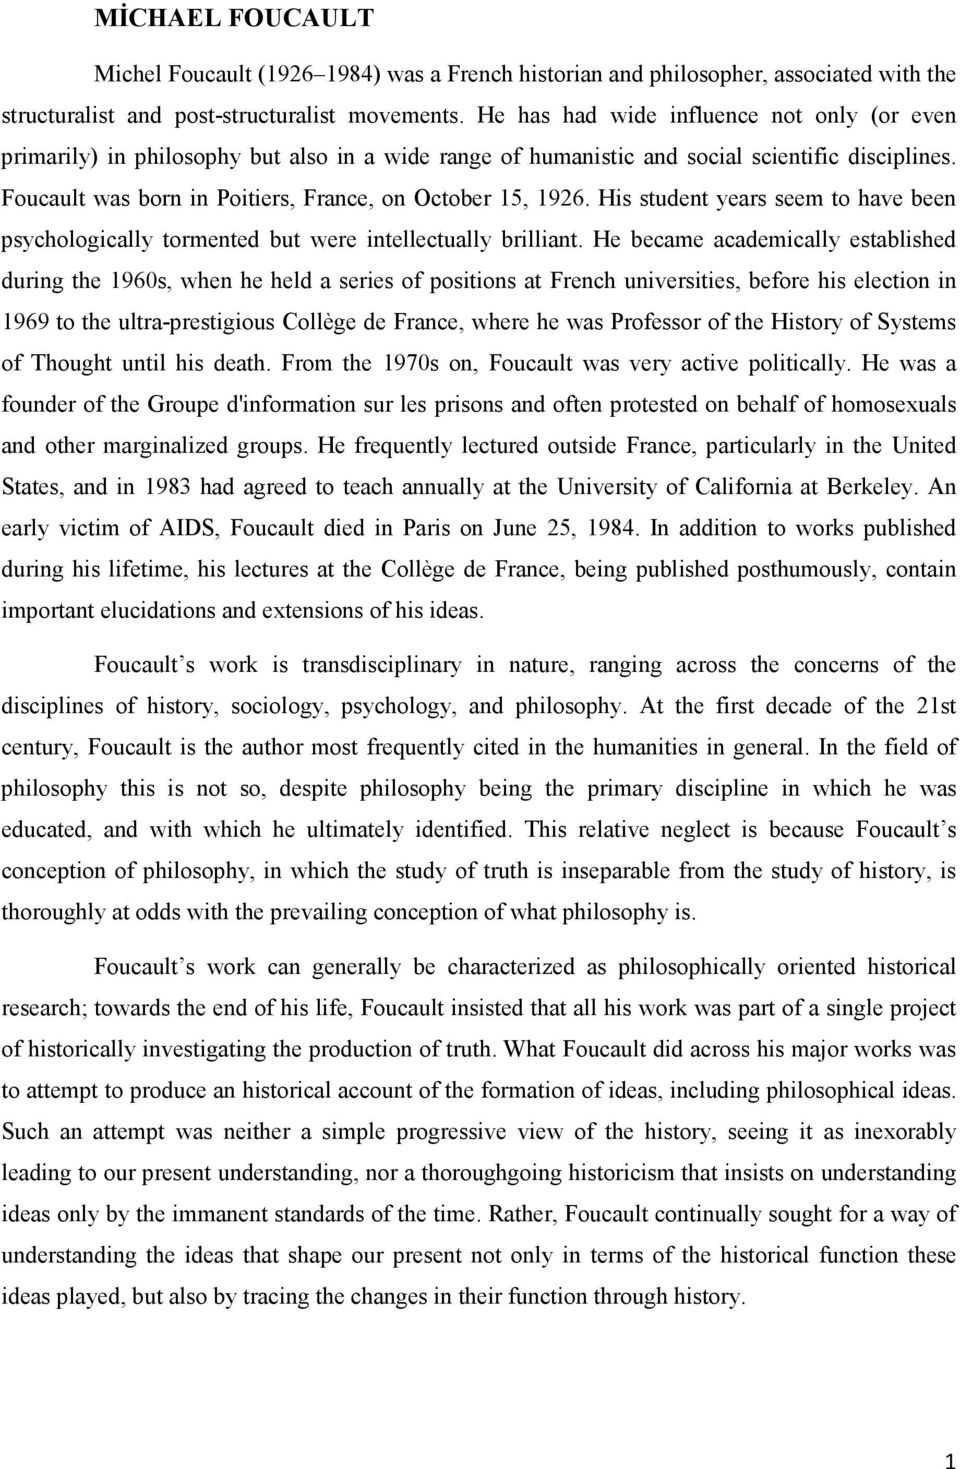 Foucault was born in Poitiers, France, on October 15, 1926. His student years seem to have been psychologically tormented but were intellectually brilliant.